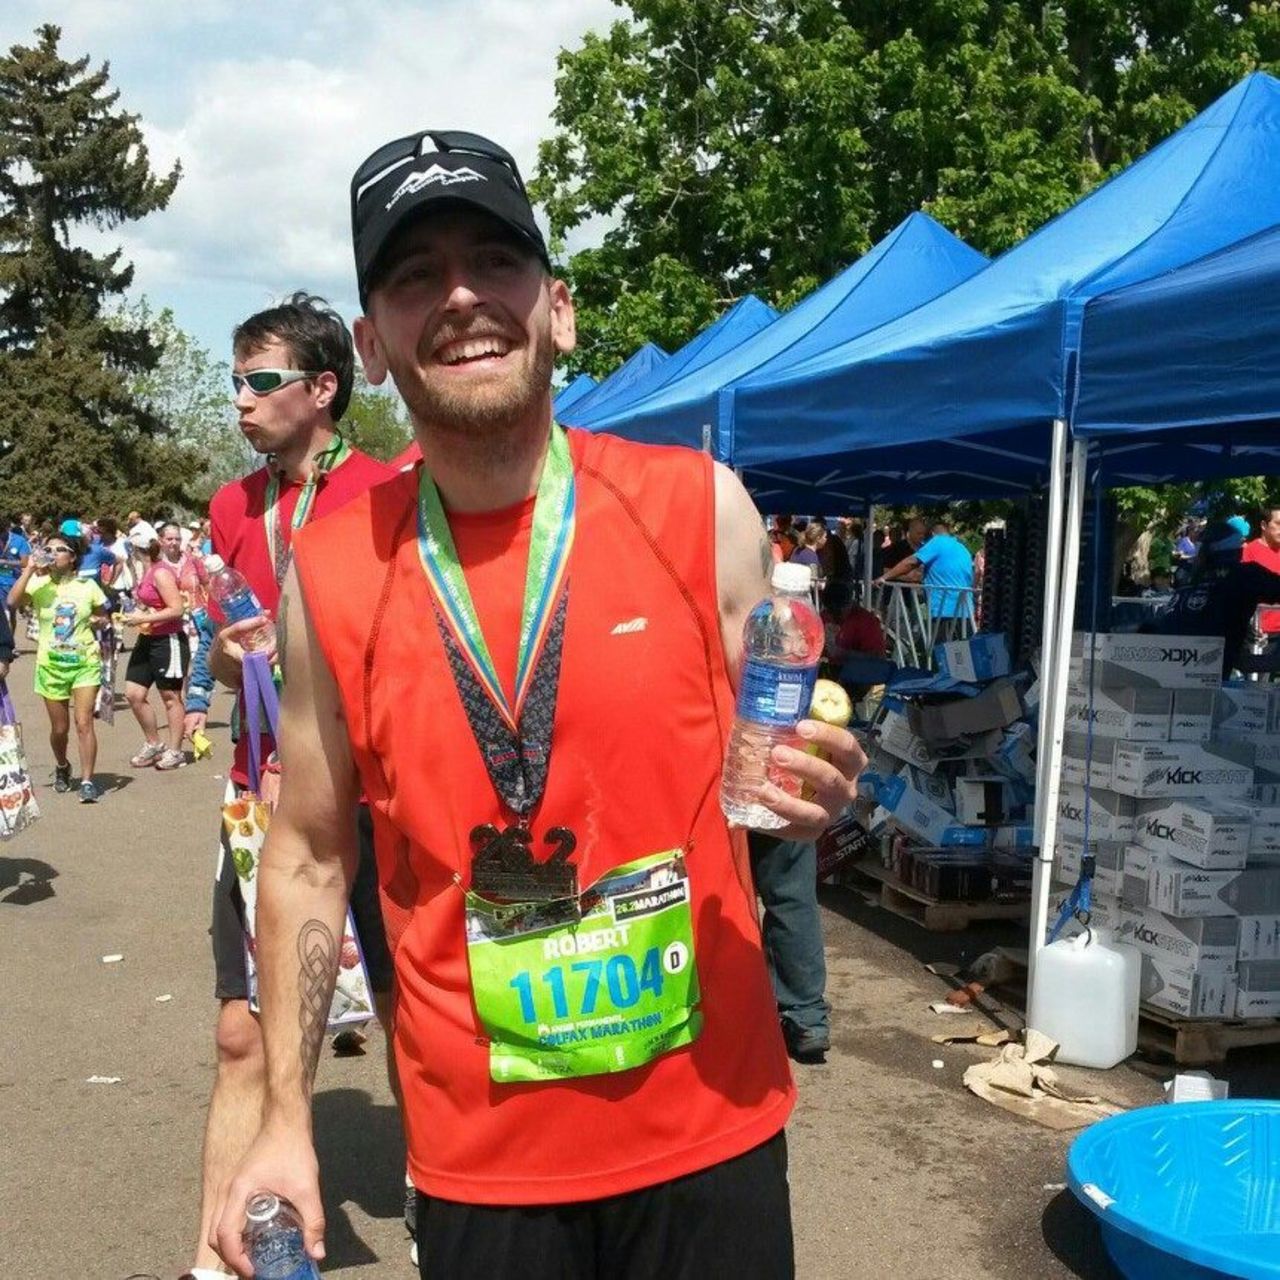 Rob, who previously thought going for a run was "unappealing to the point of agony," completed a marathon on May 18, 2014. 